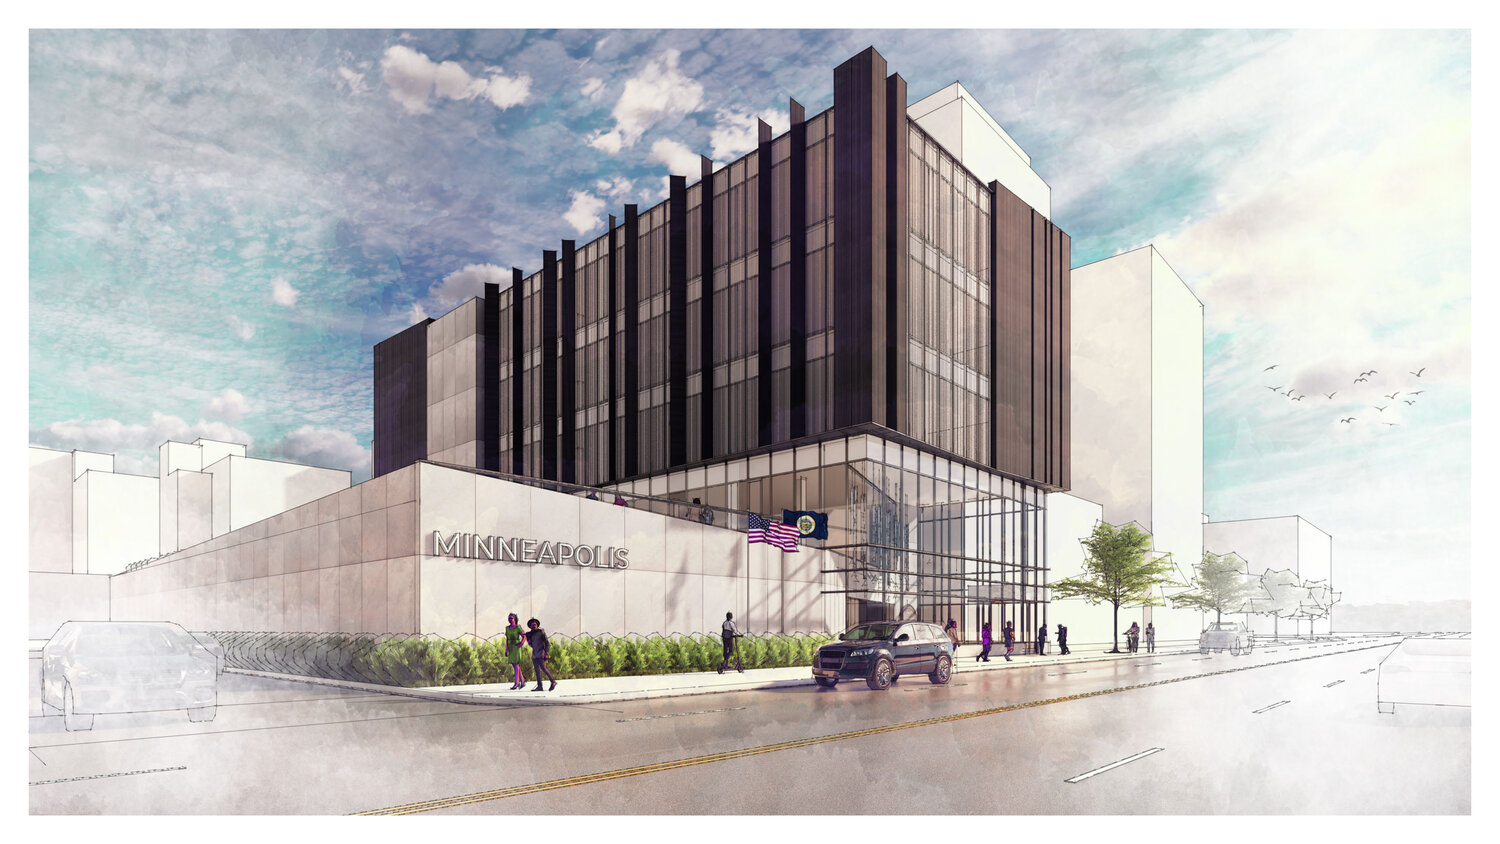 Option B: a new building located at 2600 Minnehaha Ave. at an estimated expense of $24 million.